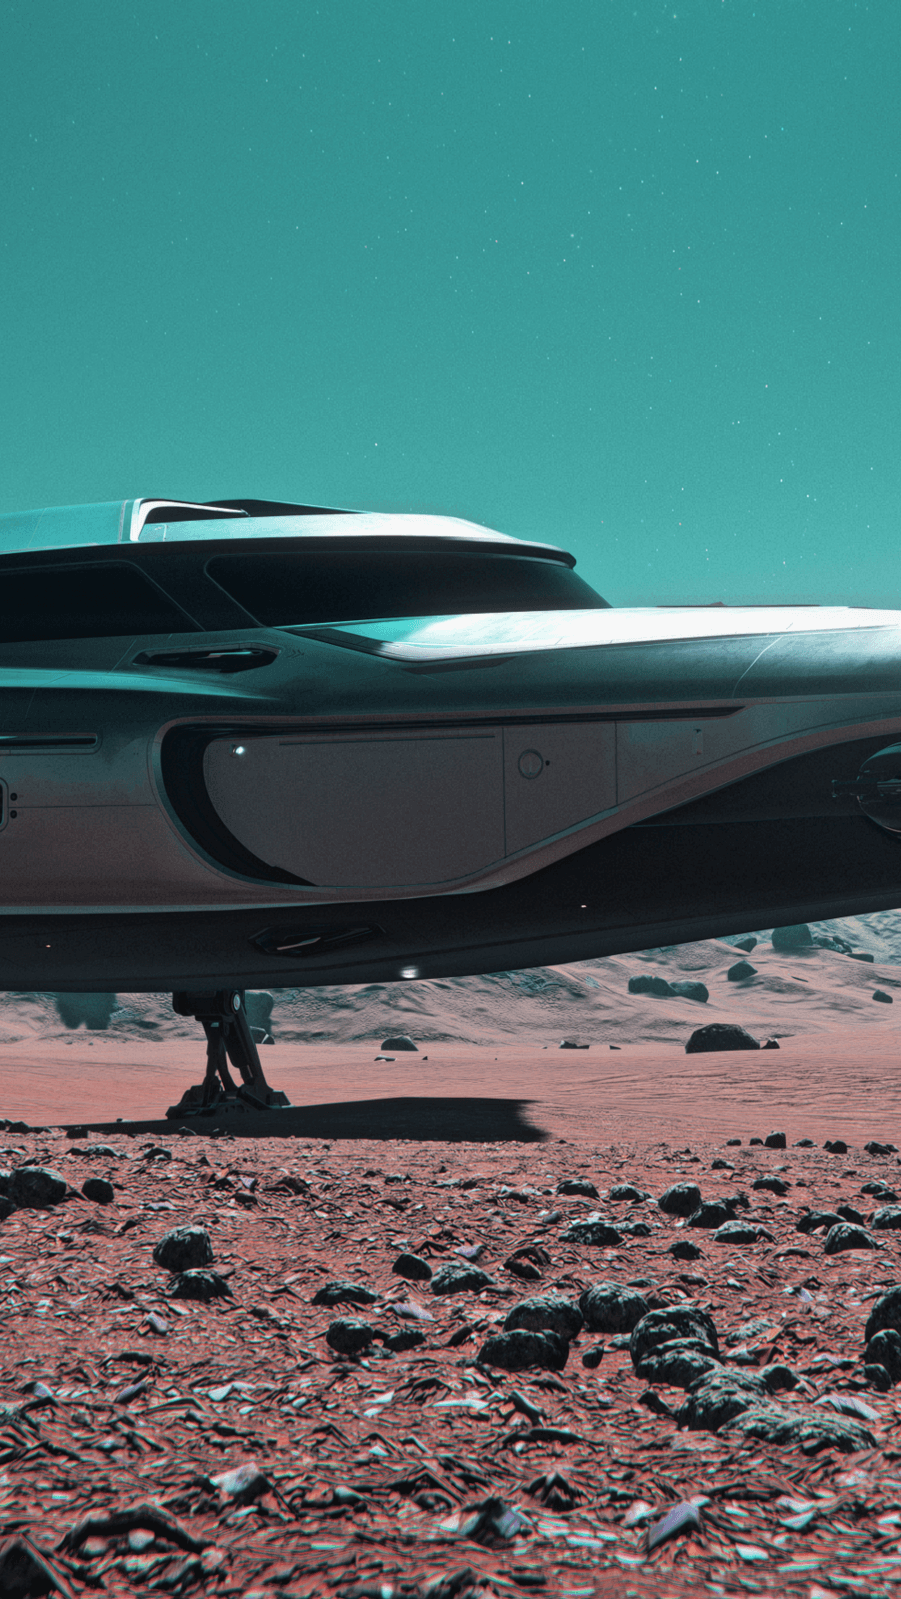 Star Citizen's Alpha 3.18 Update Leads To A Very Bad Week